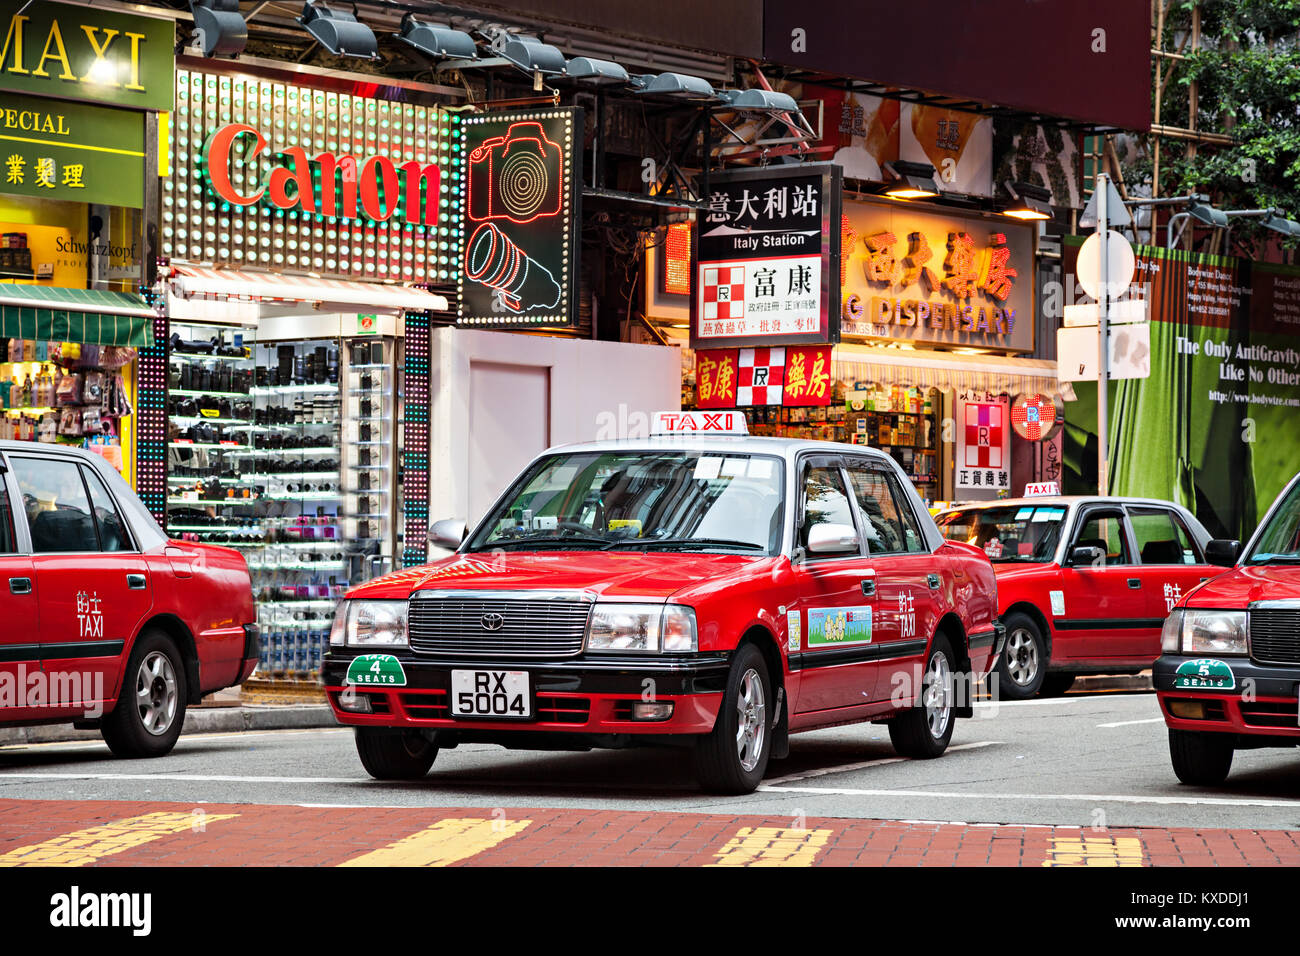 HONG KONG - MARCH 19: Taxis on the street on March 19, 2013 in Hong Kong. Over 90% daily travelers use public transport. Its the highest rank in the w Stock Photo